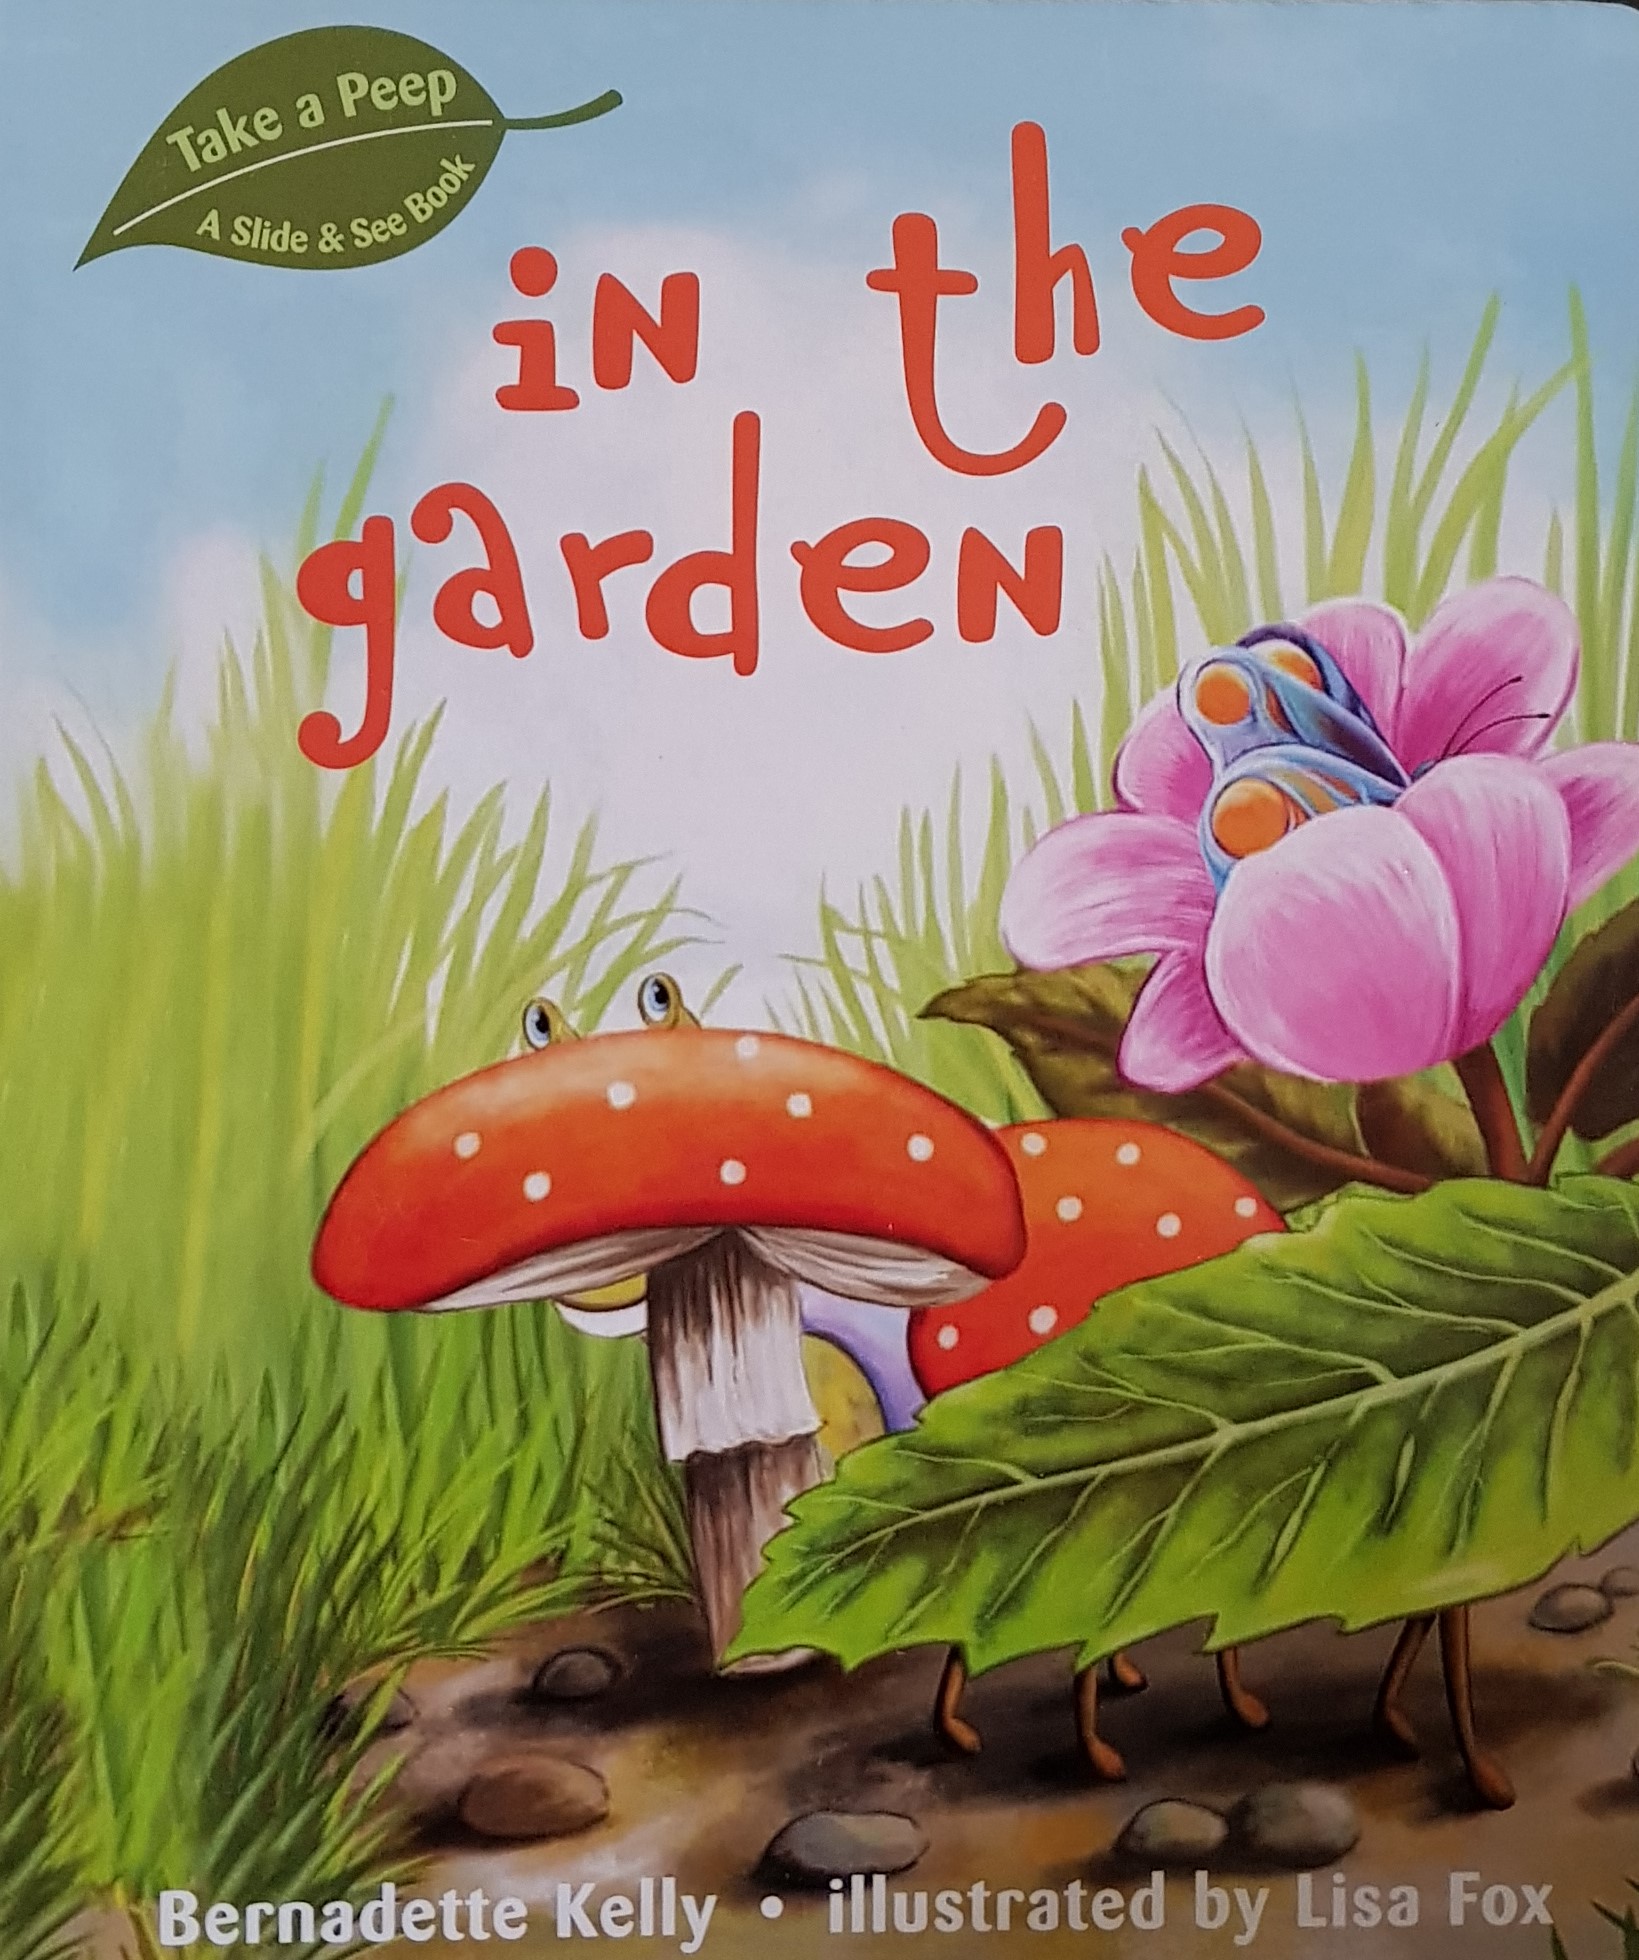 Book one from the 'Take a Peep' series for young children 2+ years. Slide open the pages to reveal creatures from the garden. Brimax Publishing.